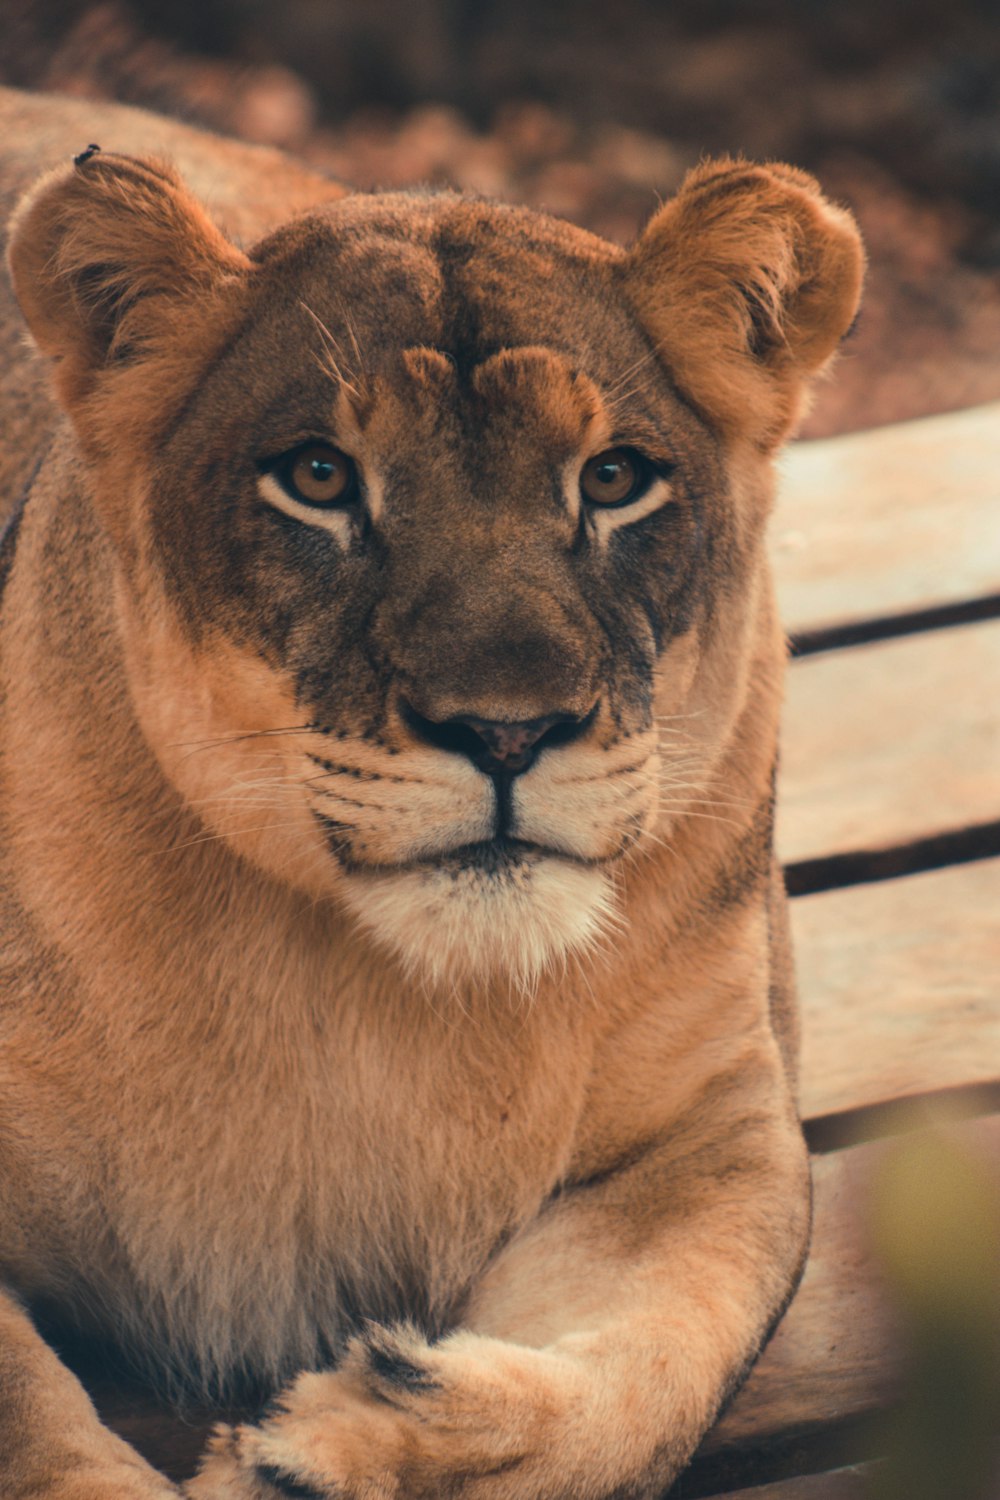 brown lioness lying on wooden floor during daytime